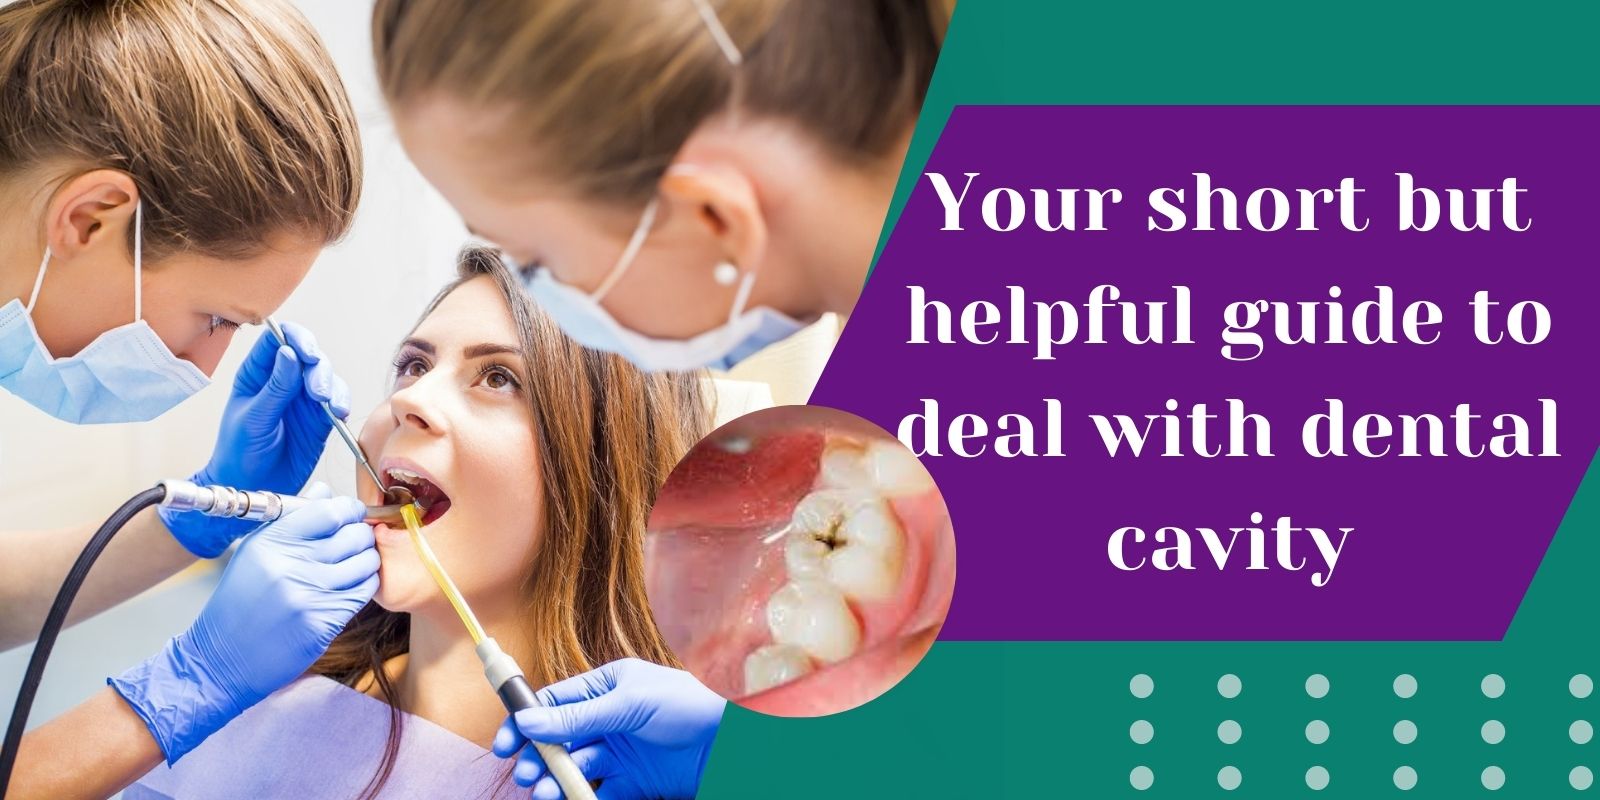 Your short but helpful guide to deal with dental cavity